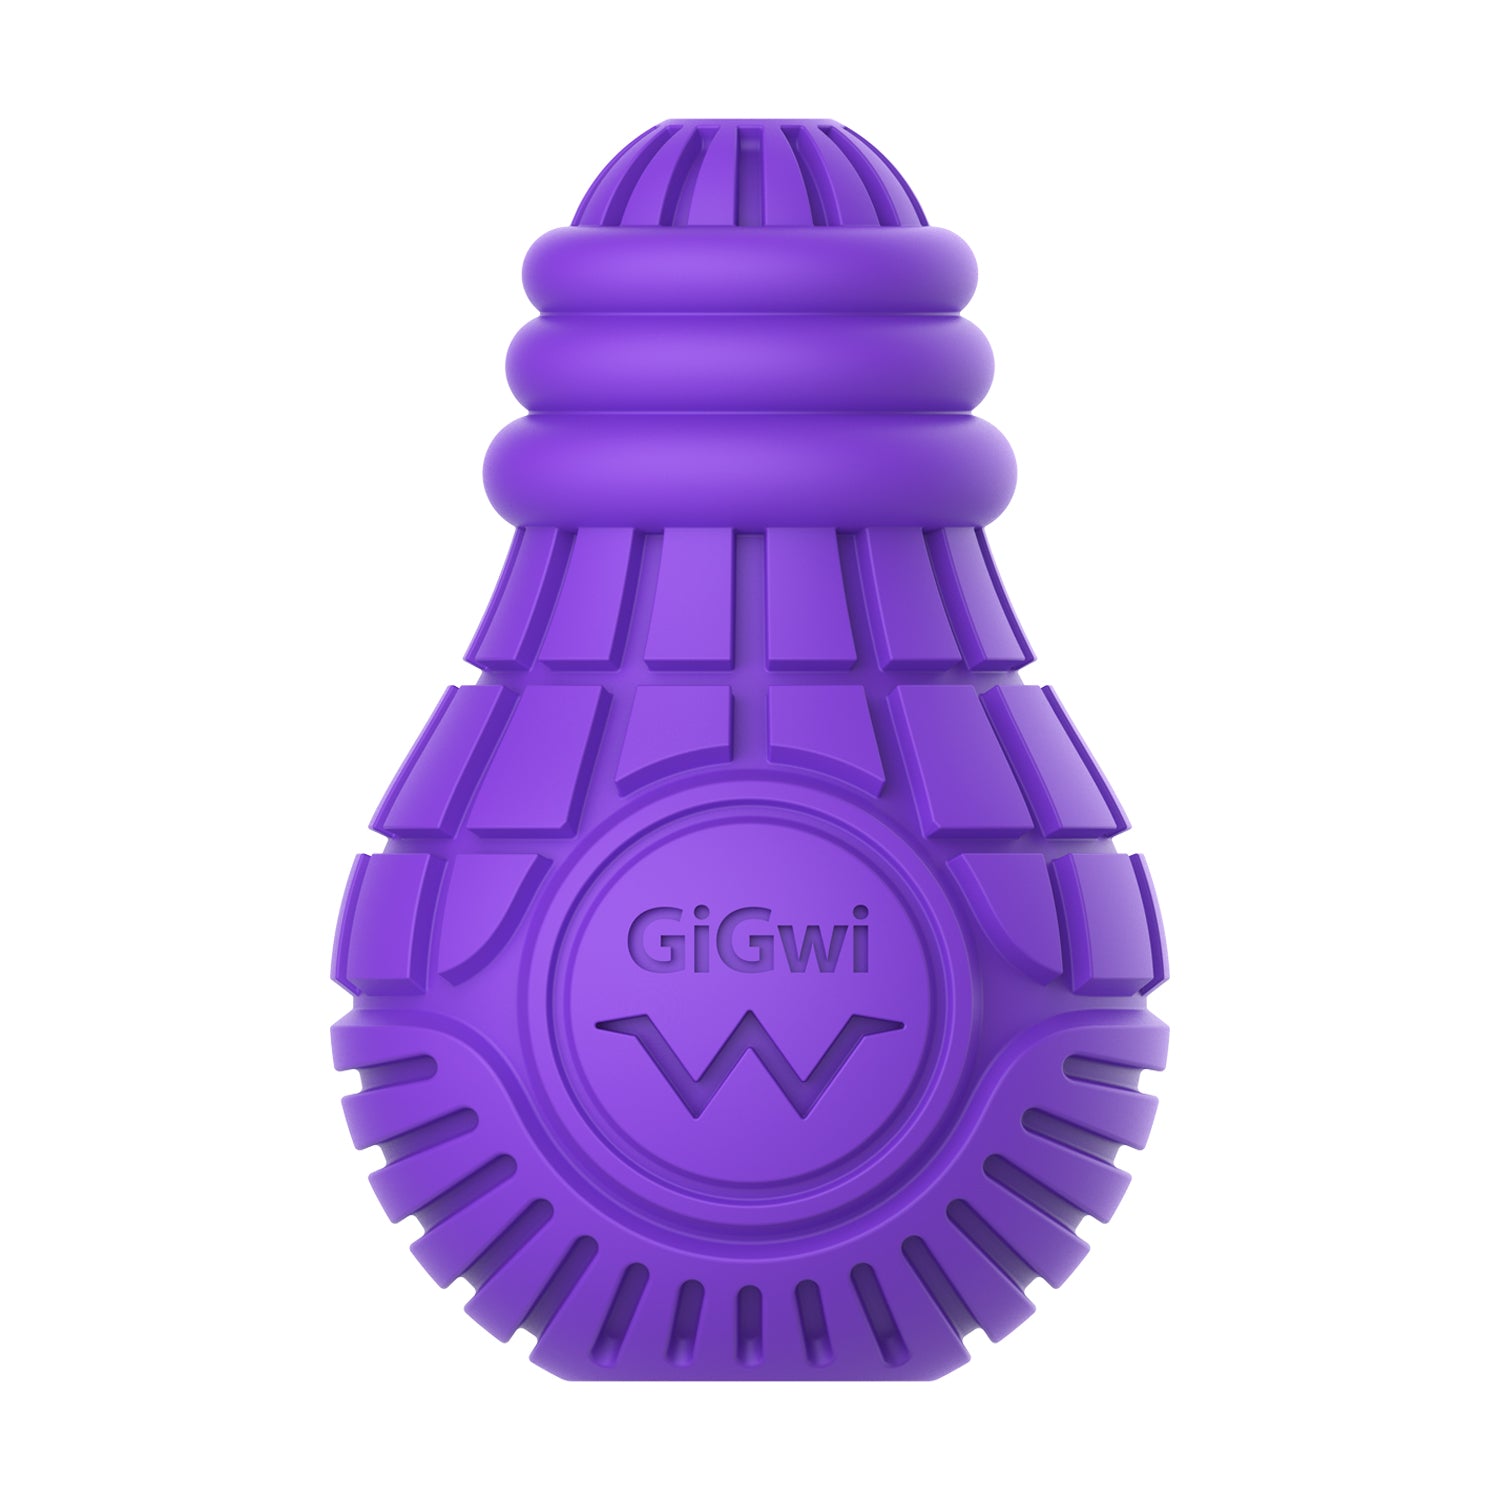 Gigwi gigwi dog toys for aggressive chewers, interactive treat dispensing dog  toys to chase and chew, durable and natural rubber do